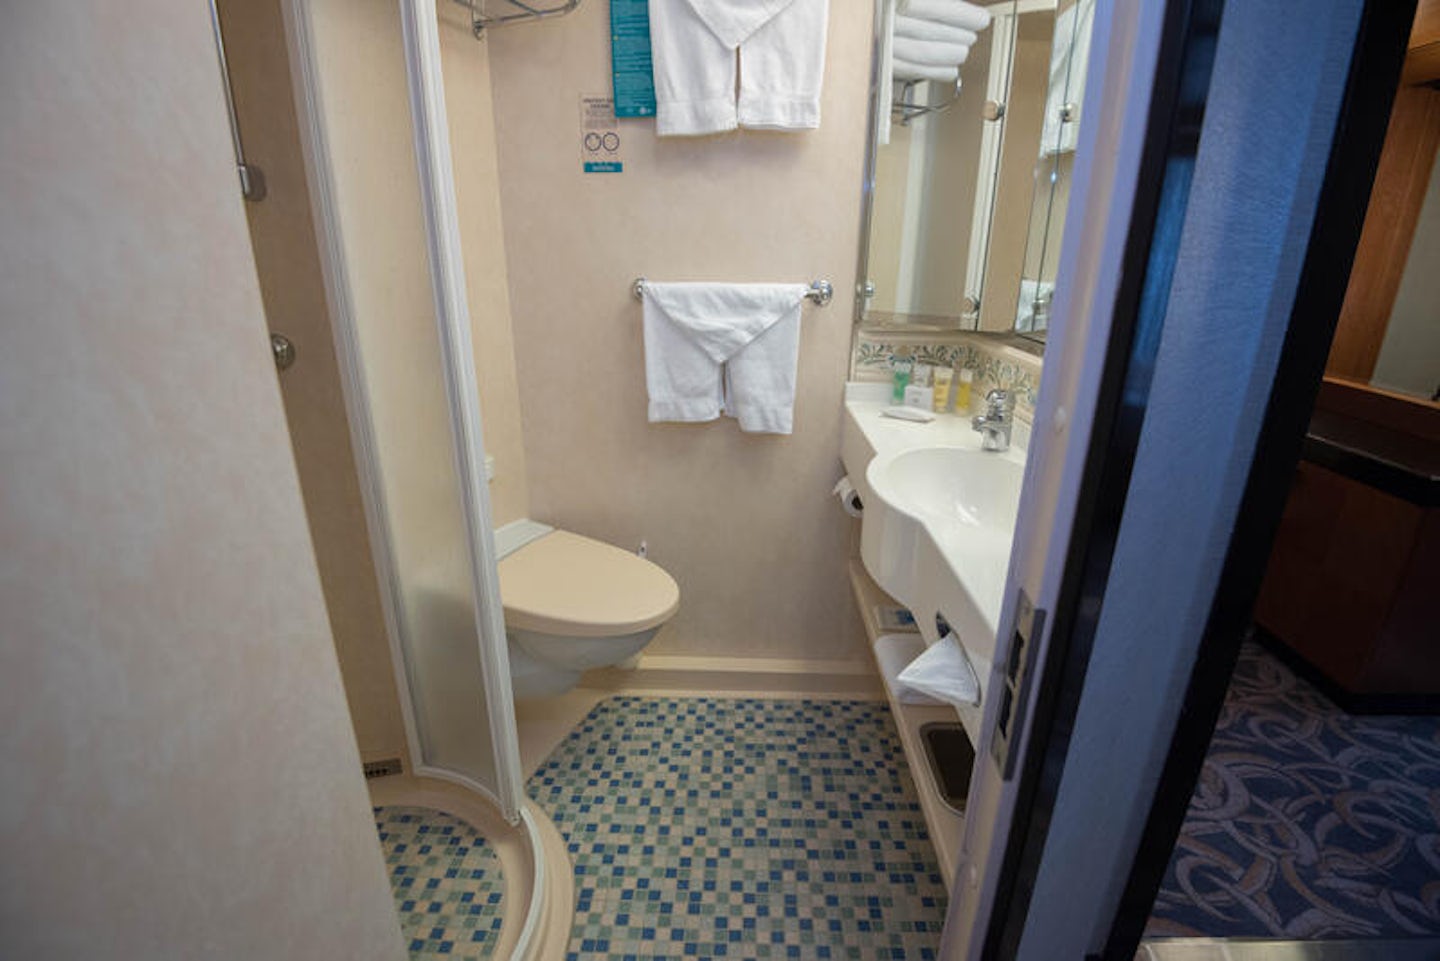 The Presidential Suite on Freedom of the Seas